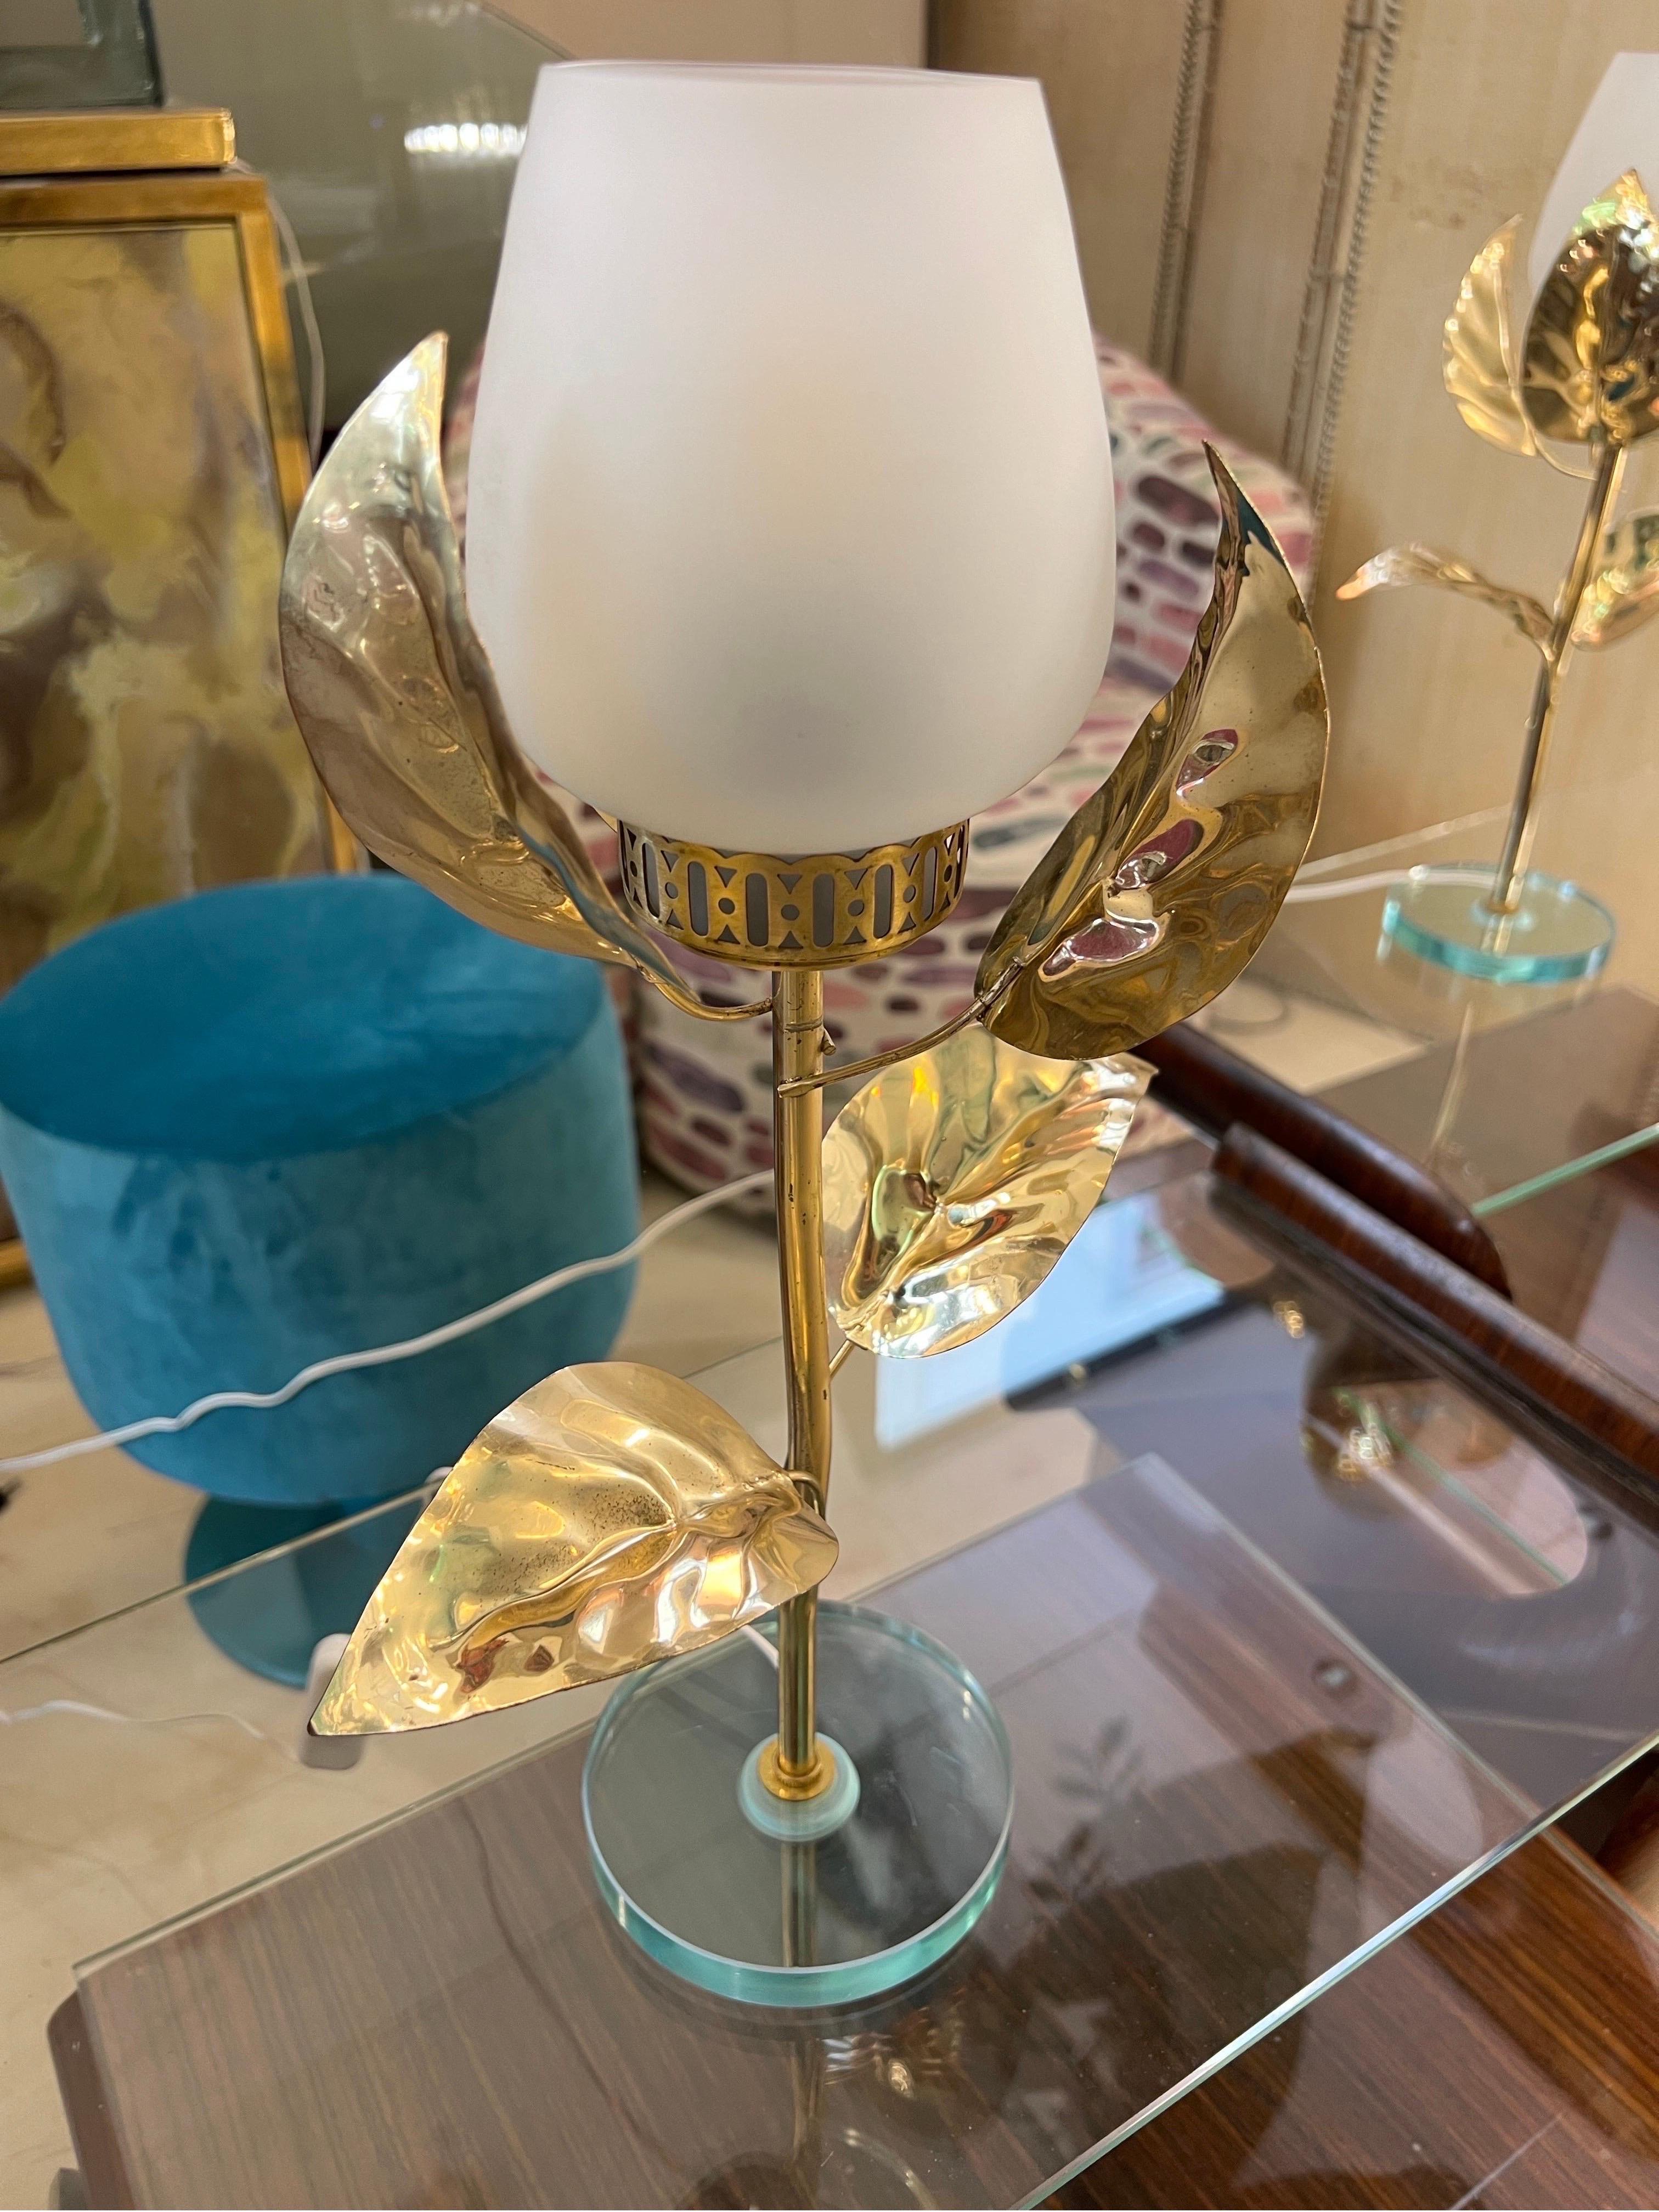  Pair of Mid-Century Flower-Shaped Lamps in White Murano Glass and Brass 1950s For Sale 9